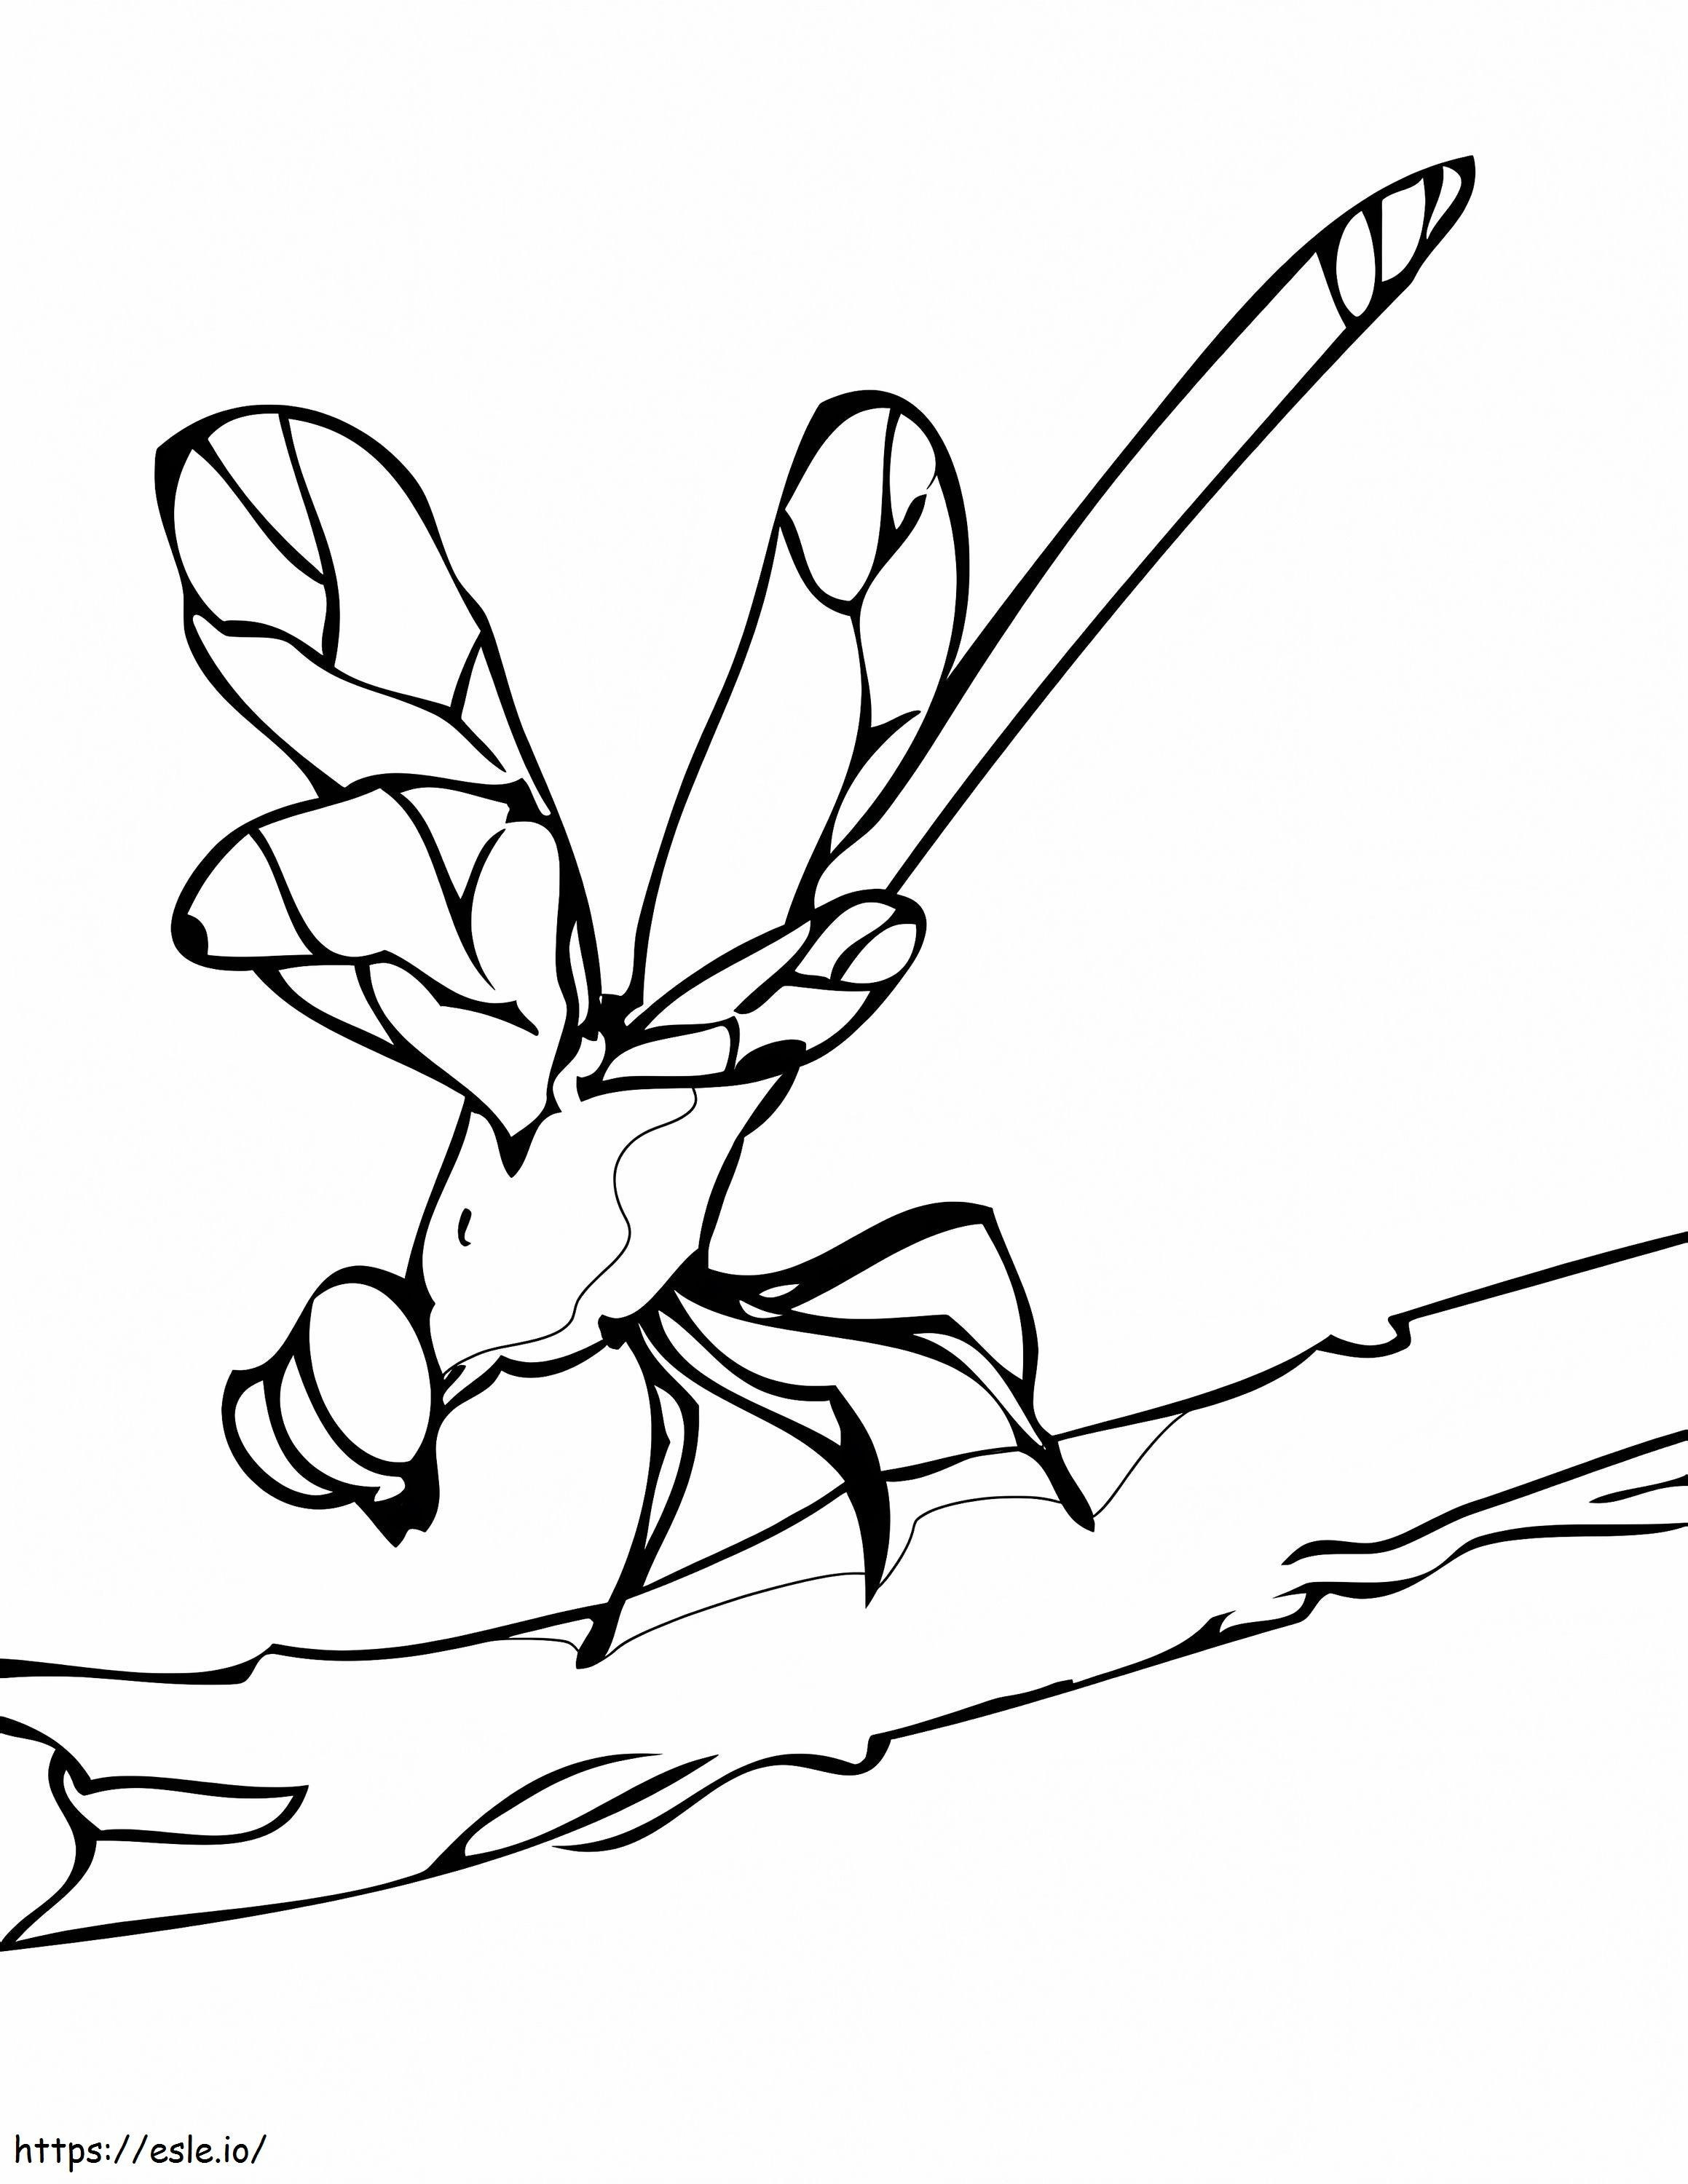 Dragonfly 2 coloring page